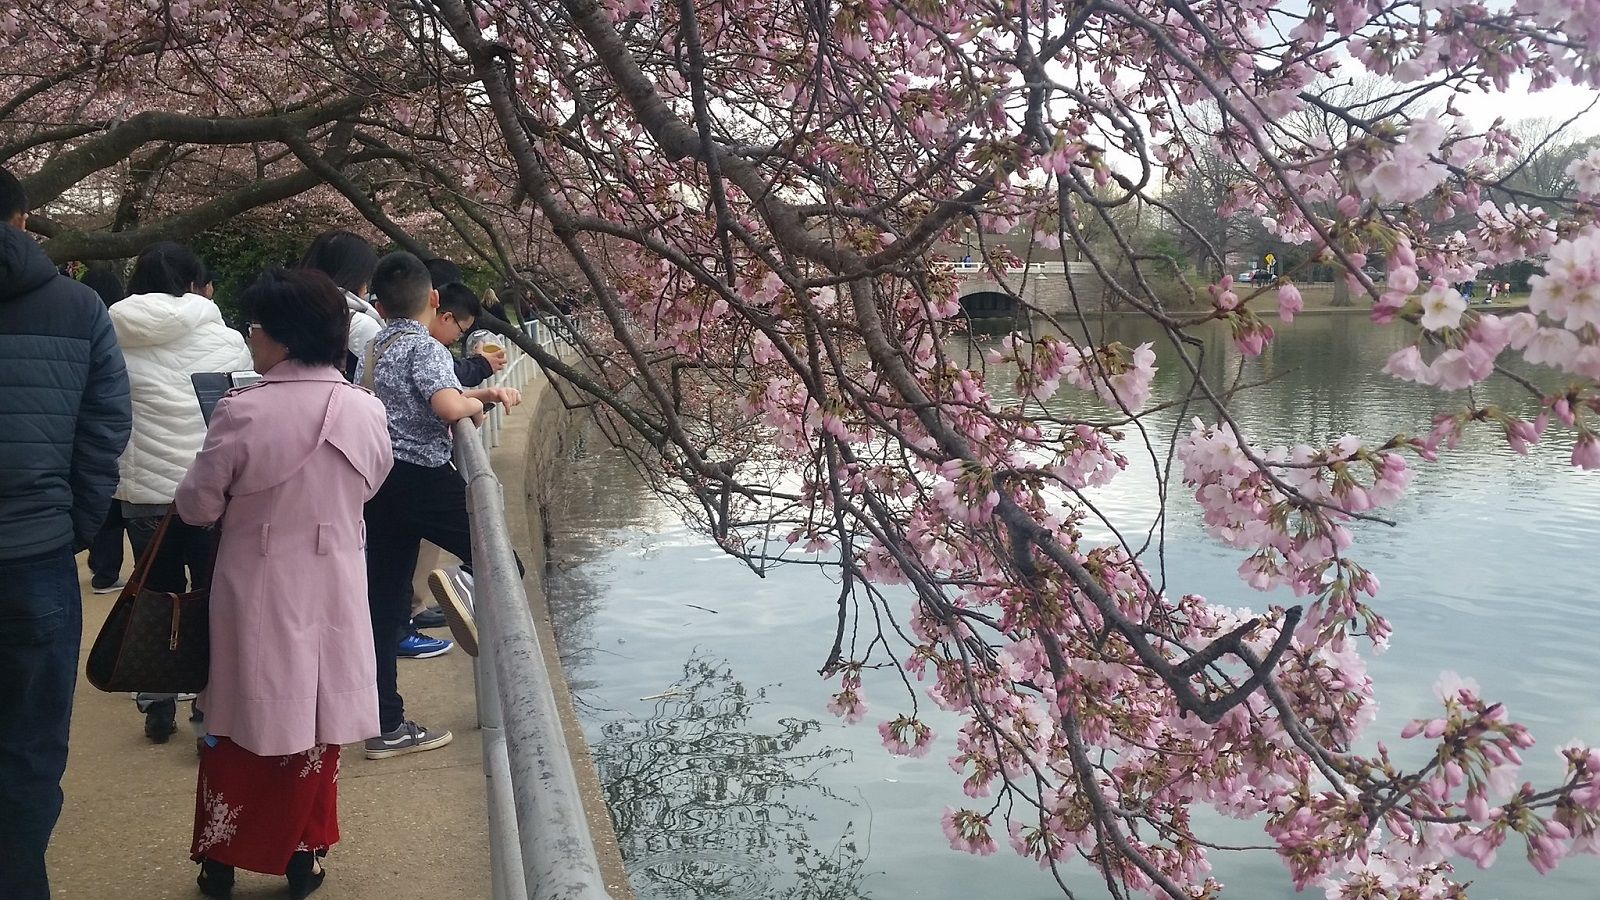 People were enjoying Easter Sunday along the Tidal Basin, where the cherry blossoms have begun turning pink and vibrant. (WTOP/Kathy Stewart)